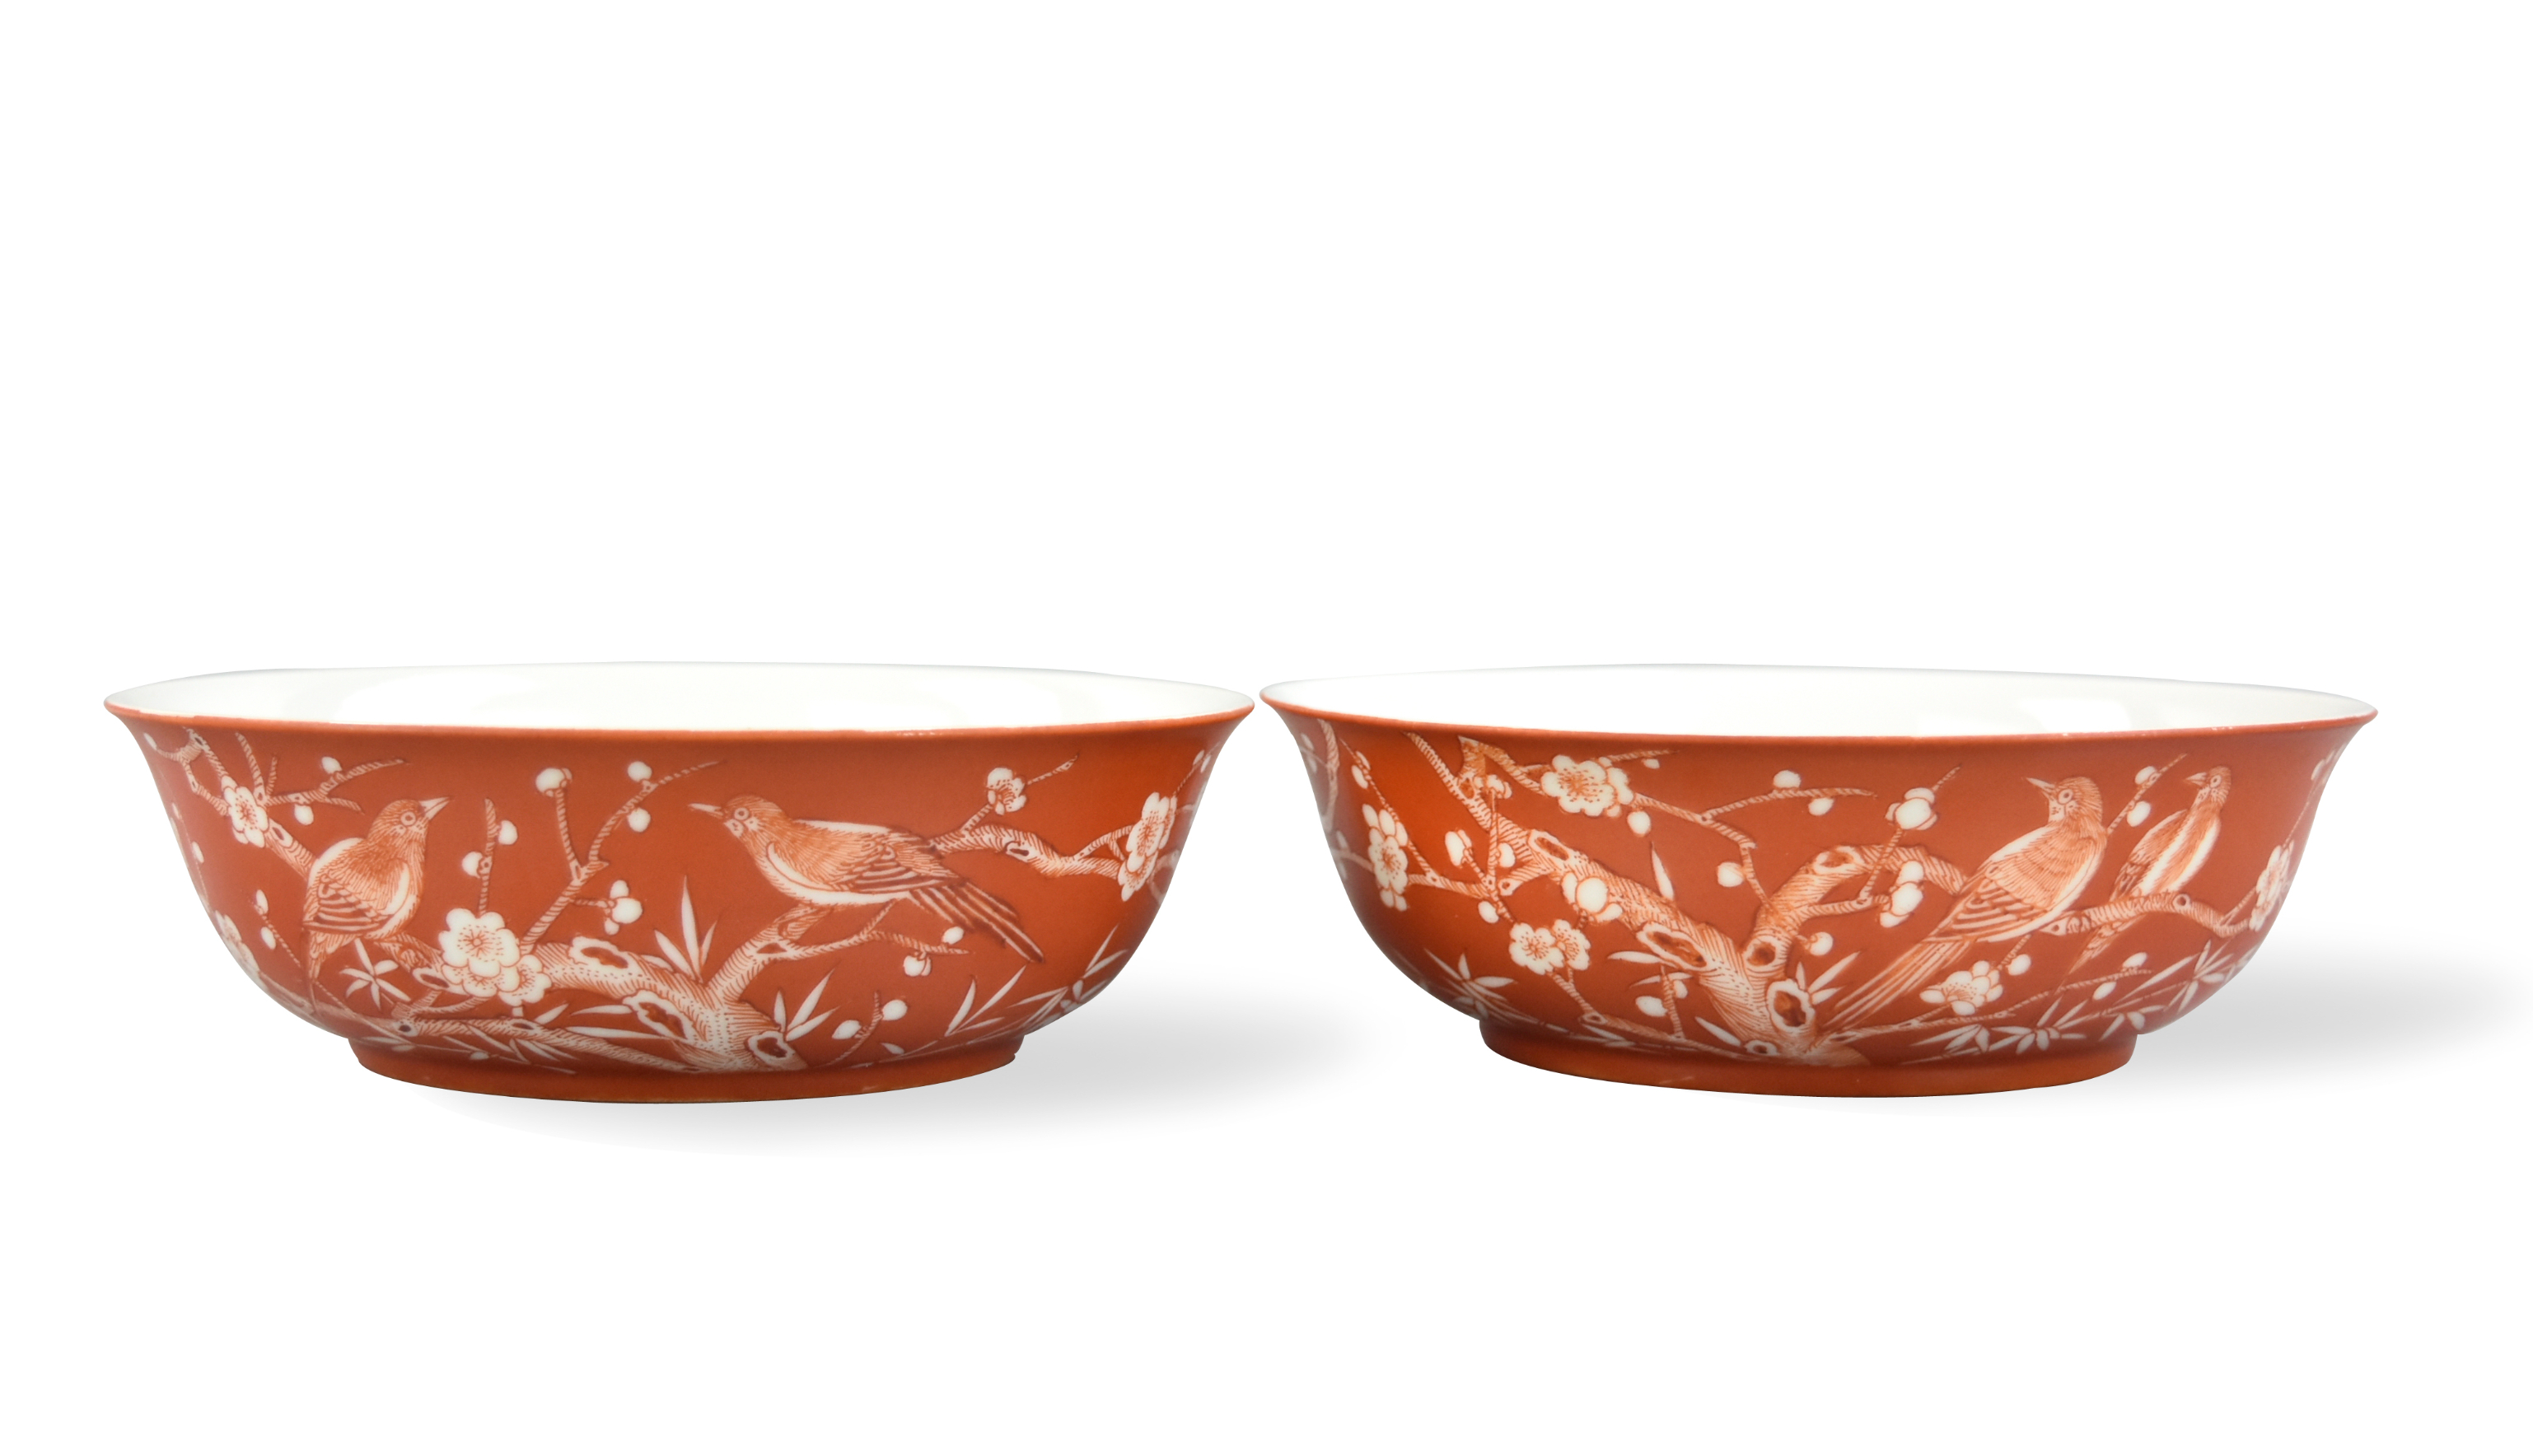 PAIR OF CHINESE IRON RED PRUNUS BOWLS  3398a6